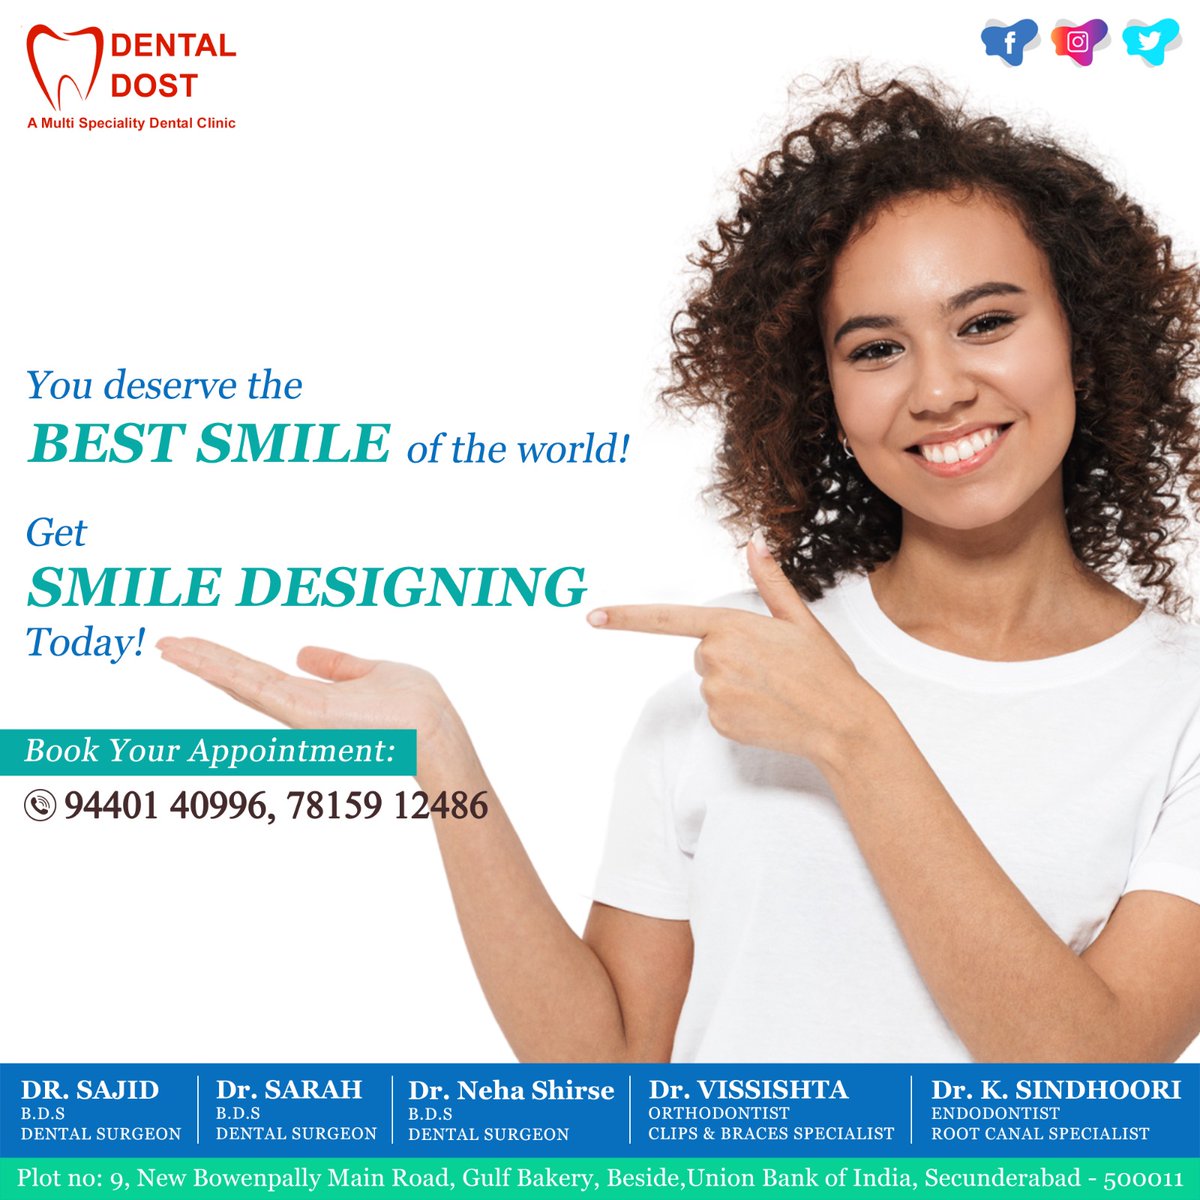 Unlock your best #smile with #smiledesigning today! Enhance your #confidence and #charm. Discover the power of a radiant smile.
Spread awareness!

#drsajid #dentalsurgeon #dentaldost #hyderabad #secunderabad #dental #dentalcare #dentalhygienist #dentalhygiene #esteticadental